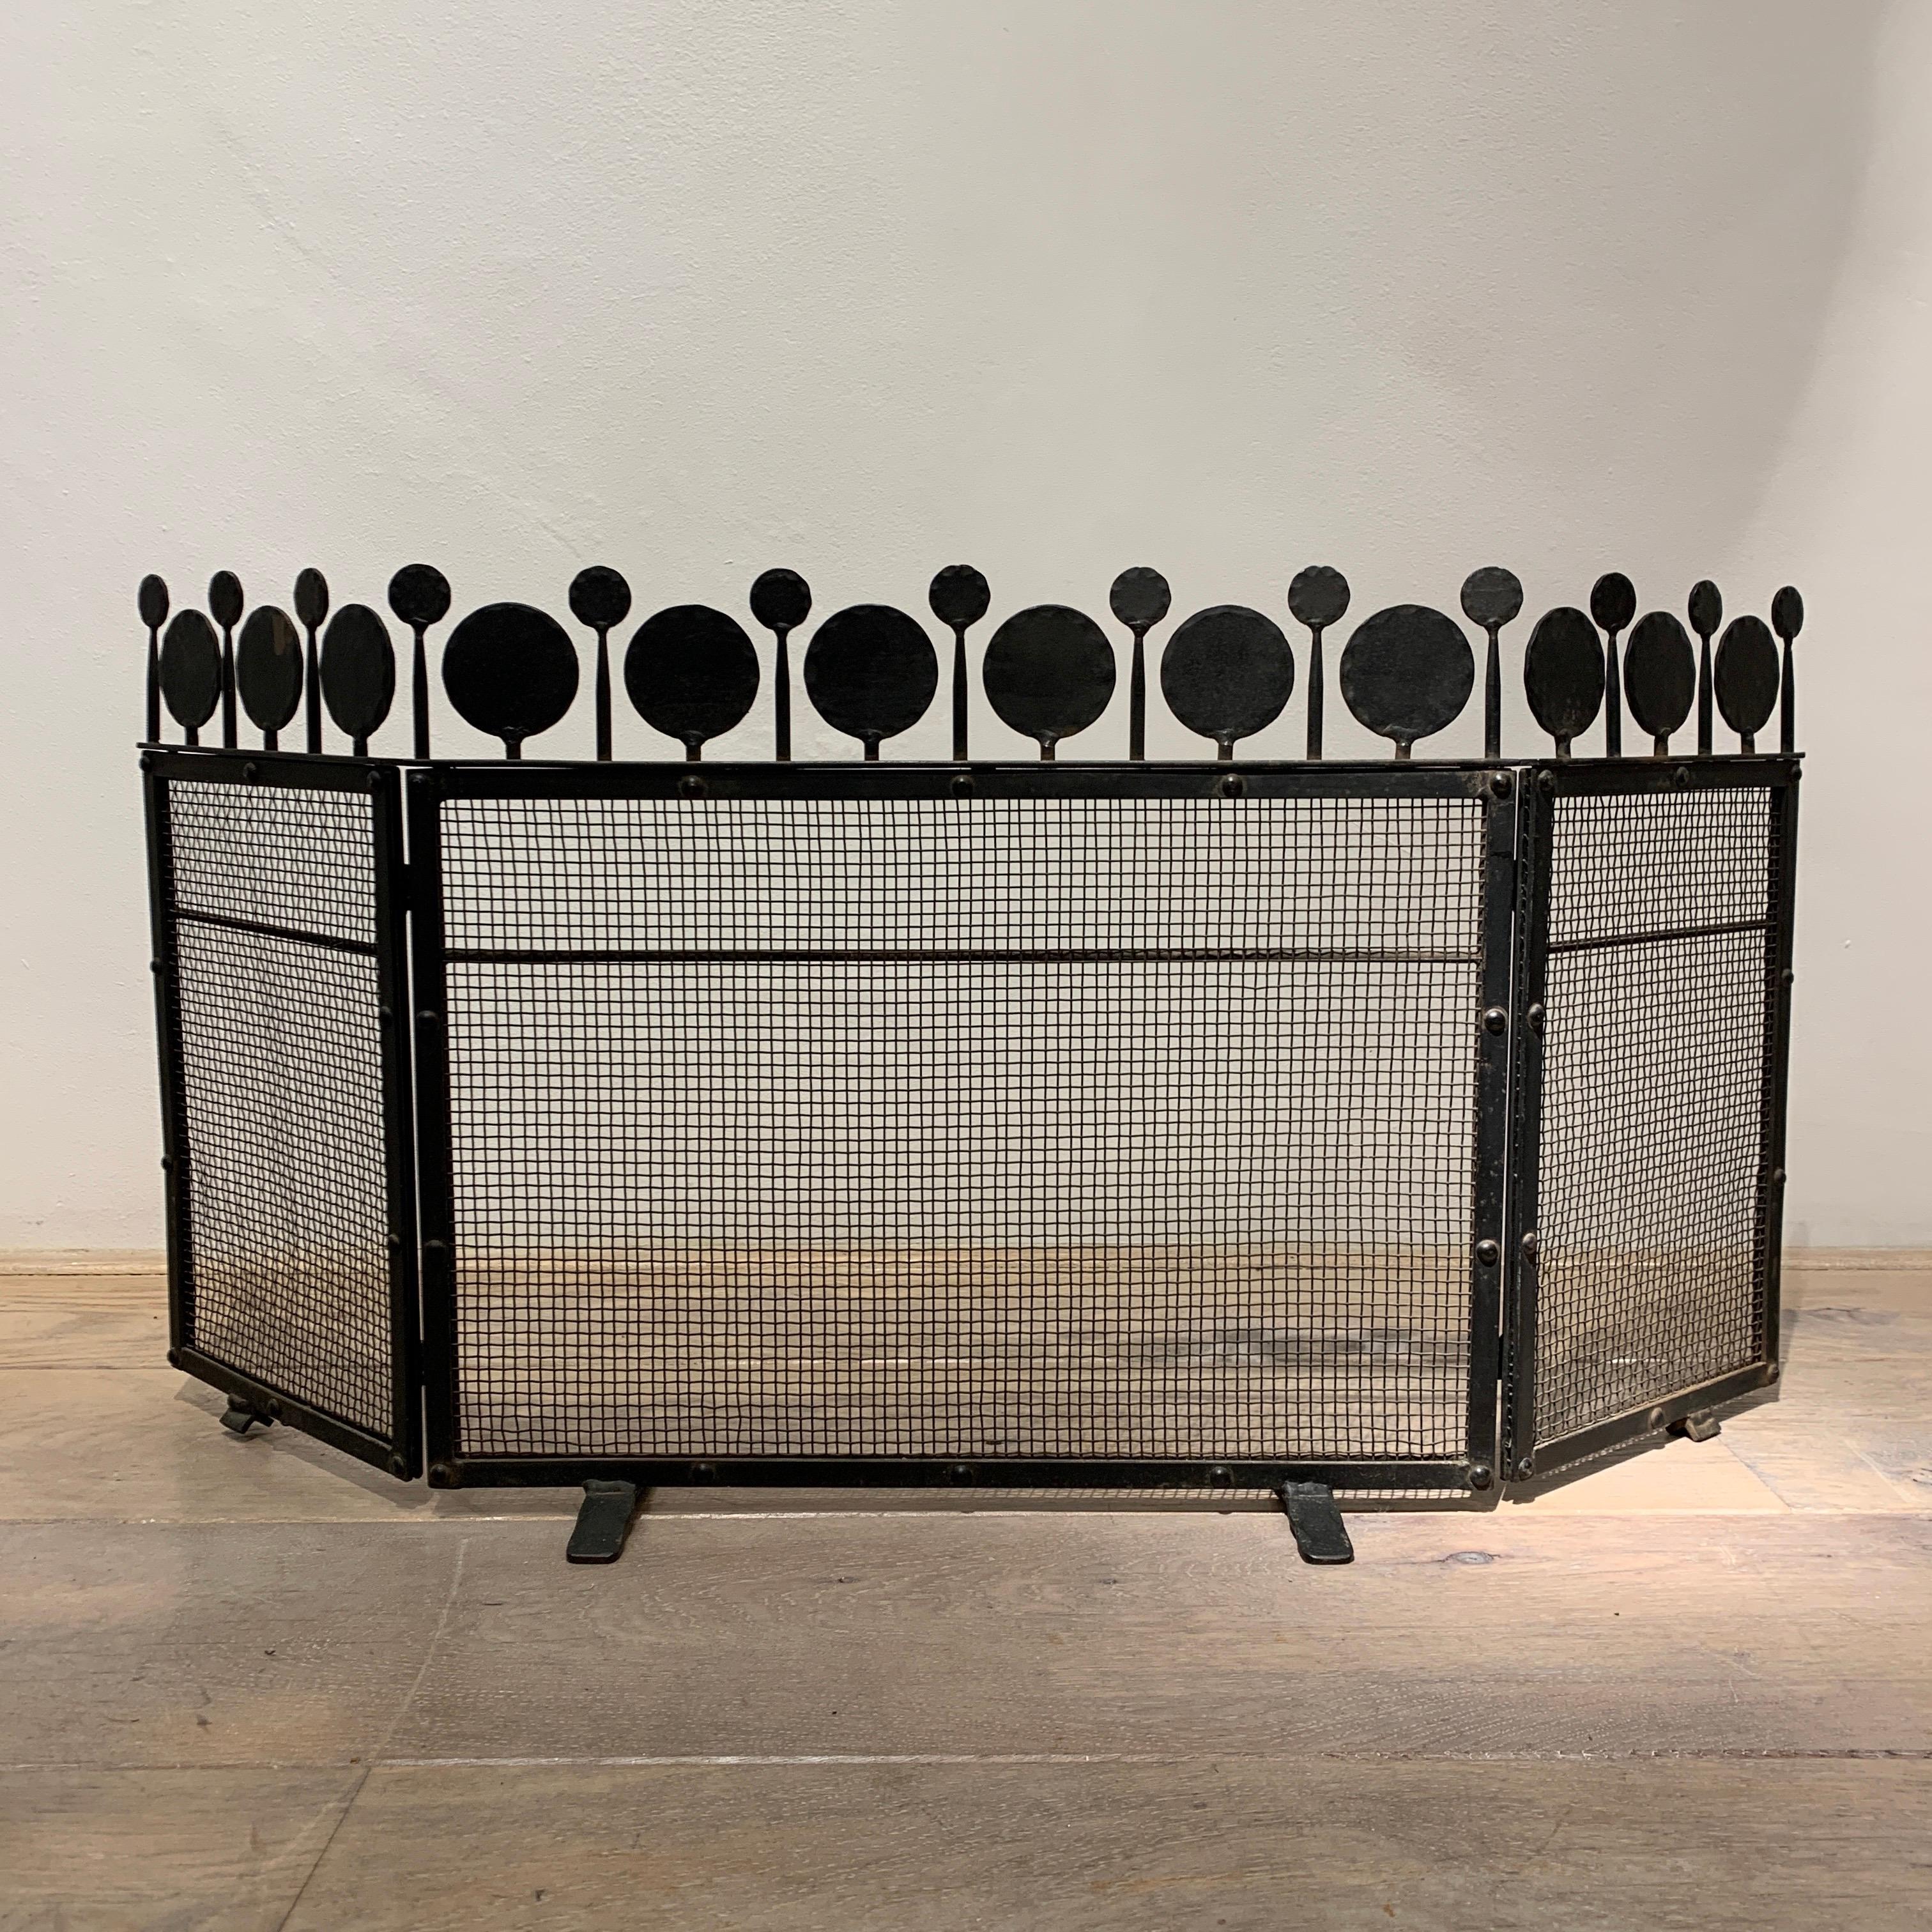 This fire screen is a work of art in itself. It is very simple and elegant design. The top is decorated by a forest of small tree shape like forms. They are hammered on the outside to give some contrast. It is a highly decorative piece by a great